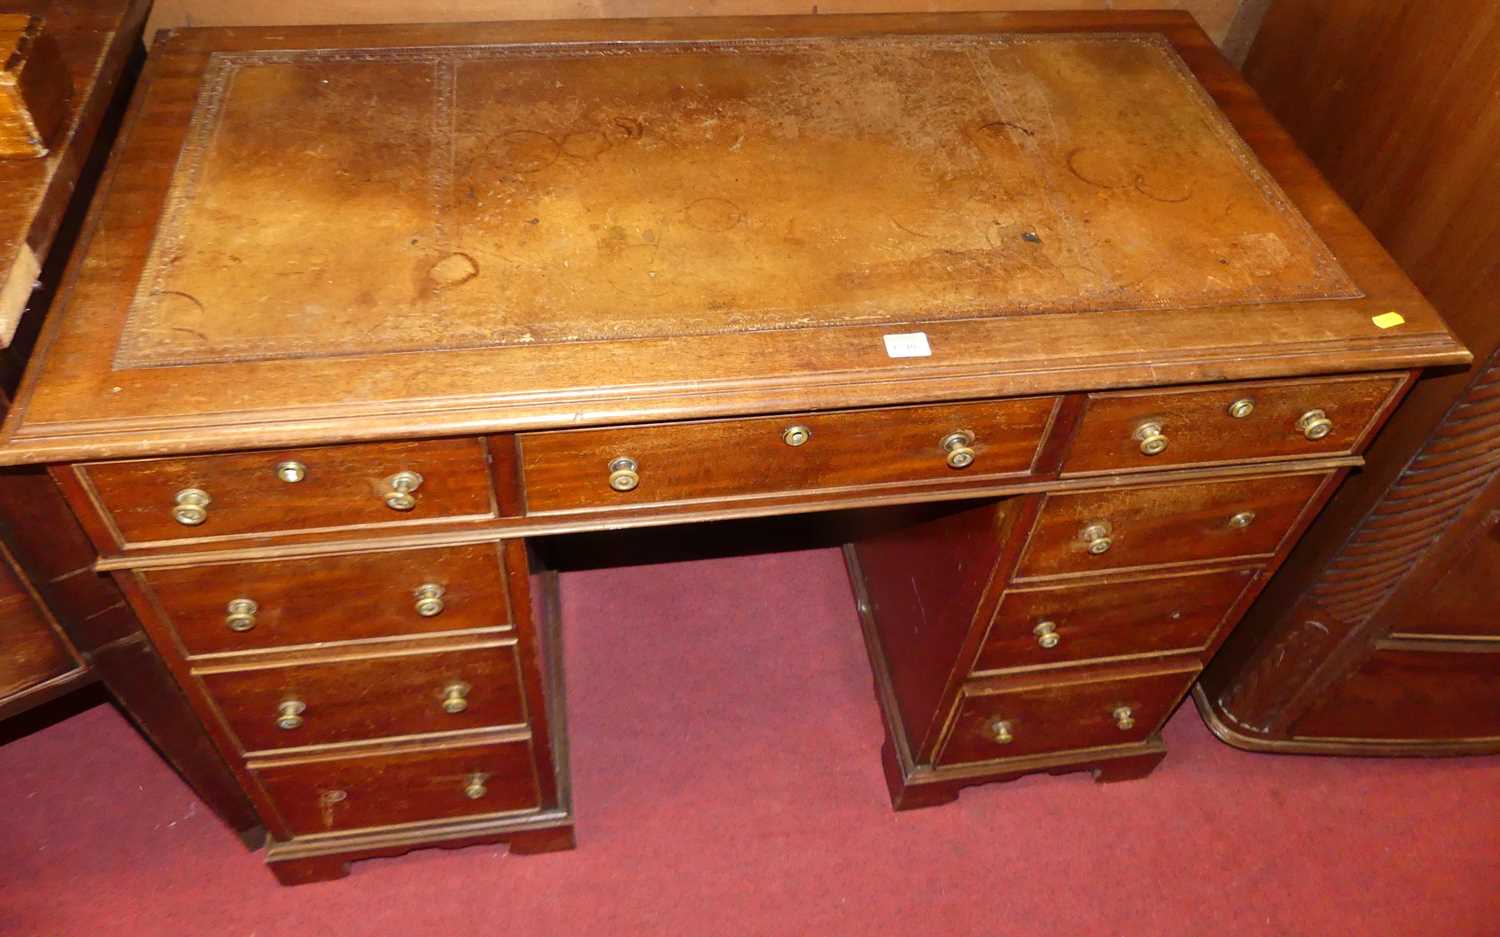 A circa 1900 mahogany and tan leather inset twin pedestal writing desk, having an arrangement of 9